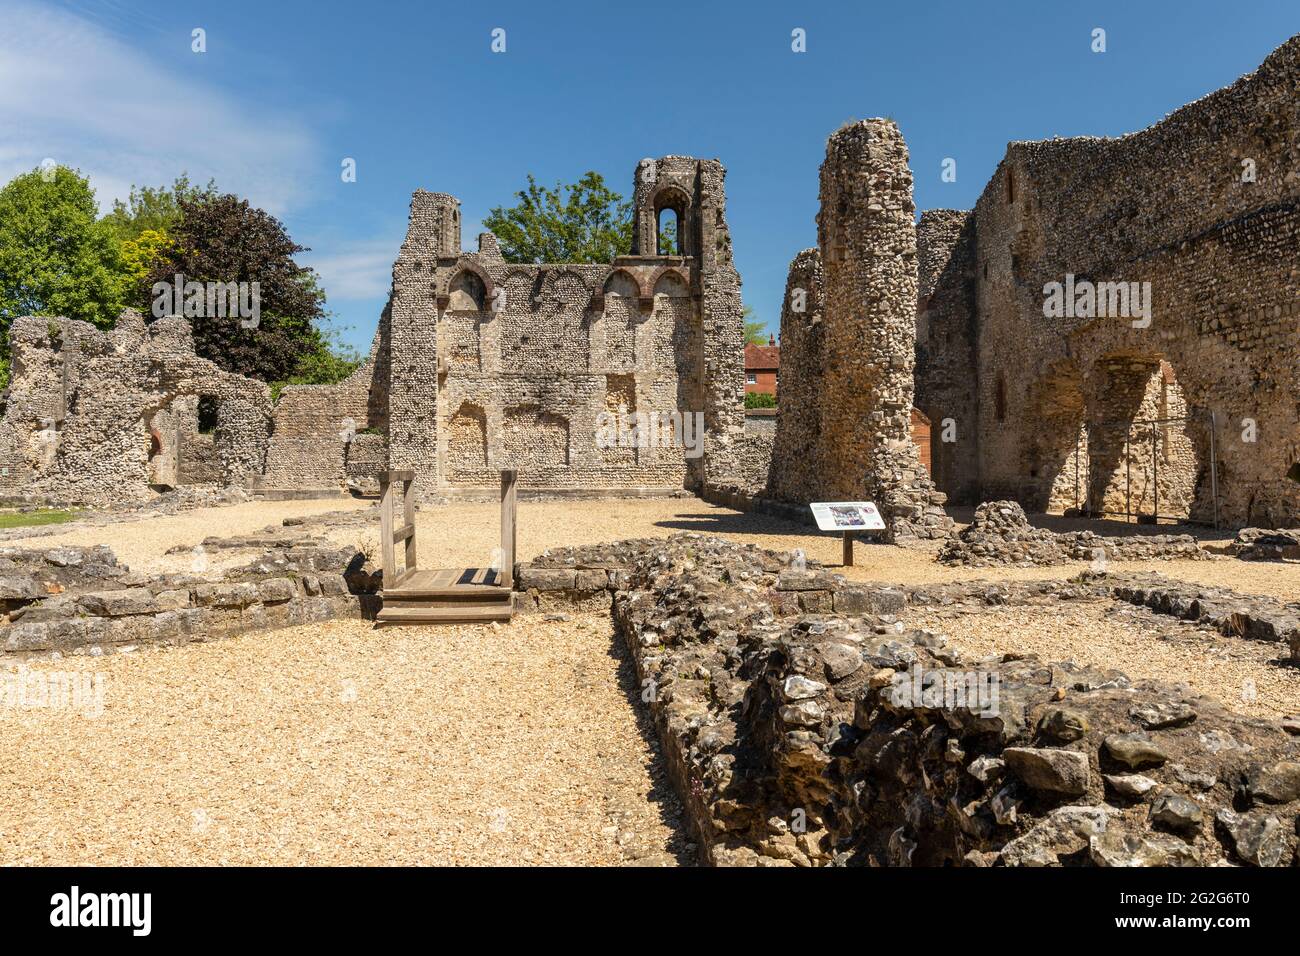 Historic ruins of Wolvesey Castle /  Old Bishops Palace in Winchester, Hampshire, England, UK Stock Photo